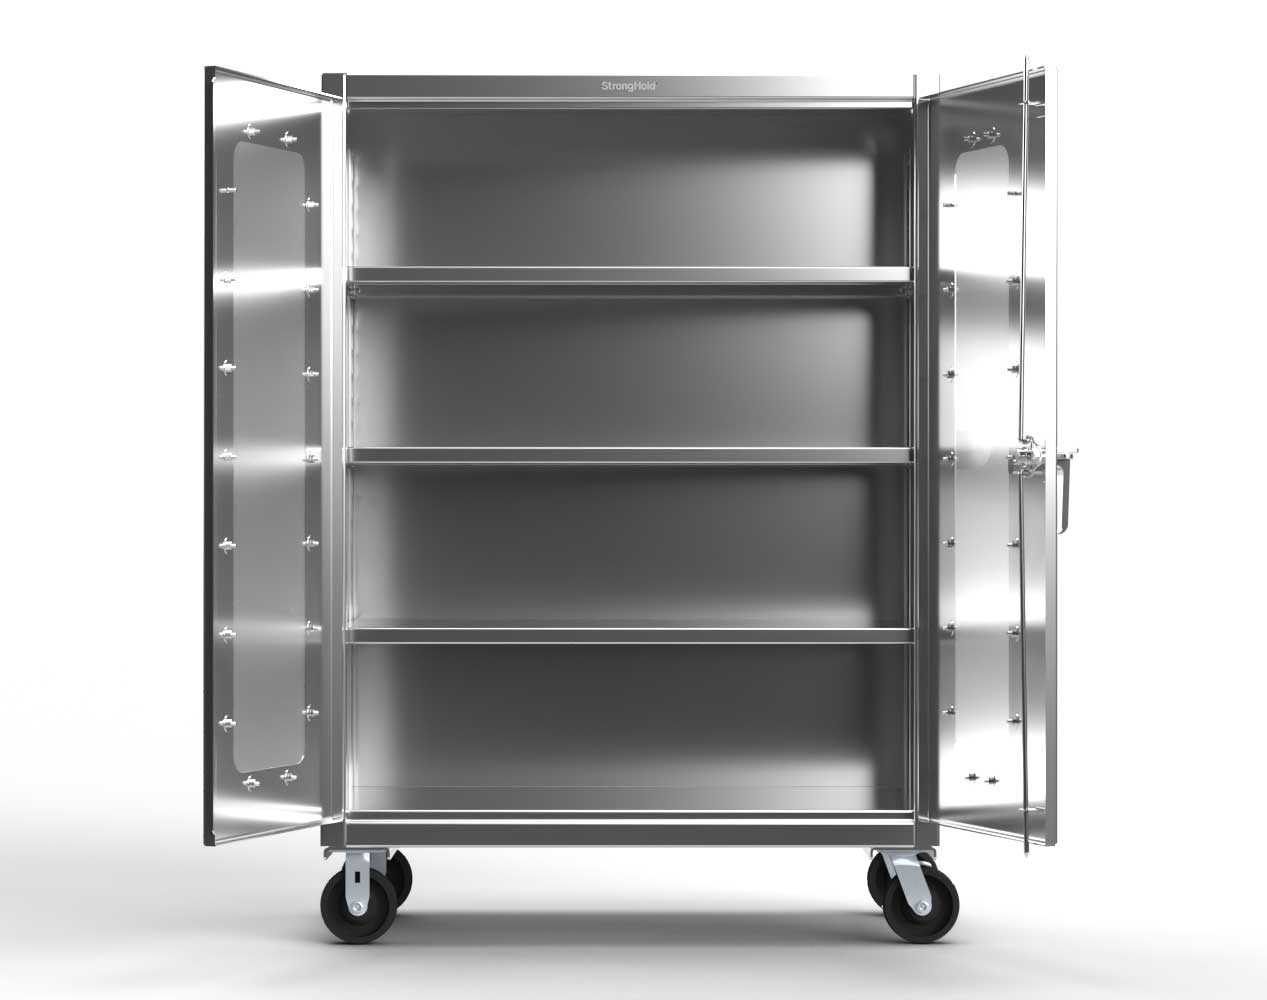 Extreme Duty 12 GA Stainless Steel Mobile Medical Cabinet with Cylinder Lock, 2 Shelves - 36 In. W x 24 In. D x 44 In. H